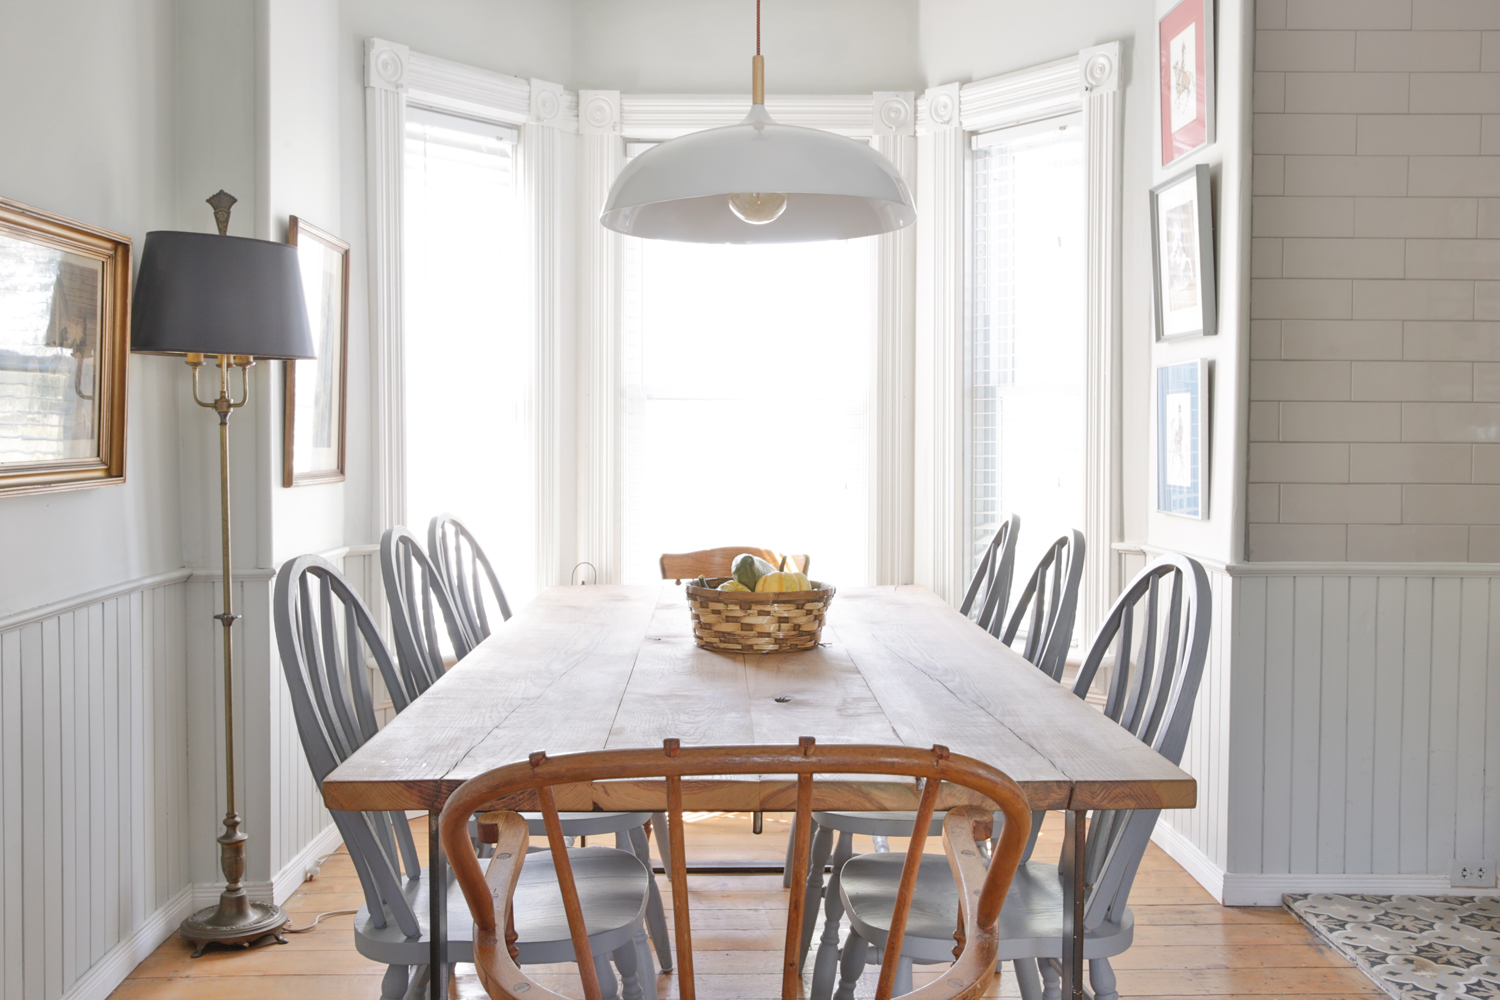 Farmhouse dining table and chairs in white dining room